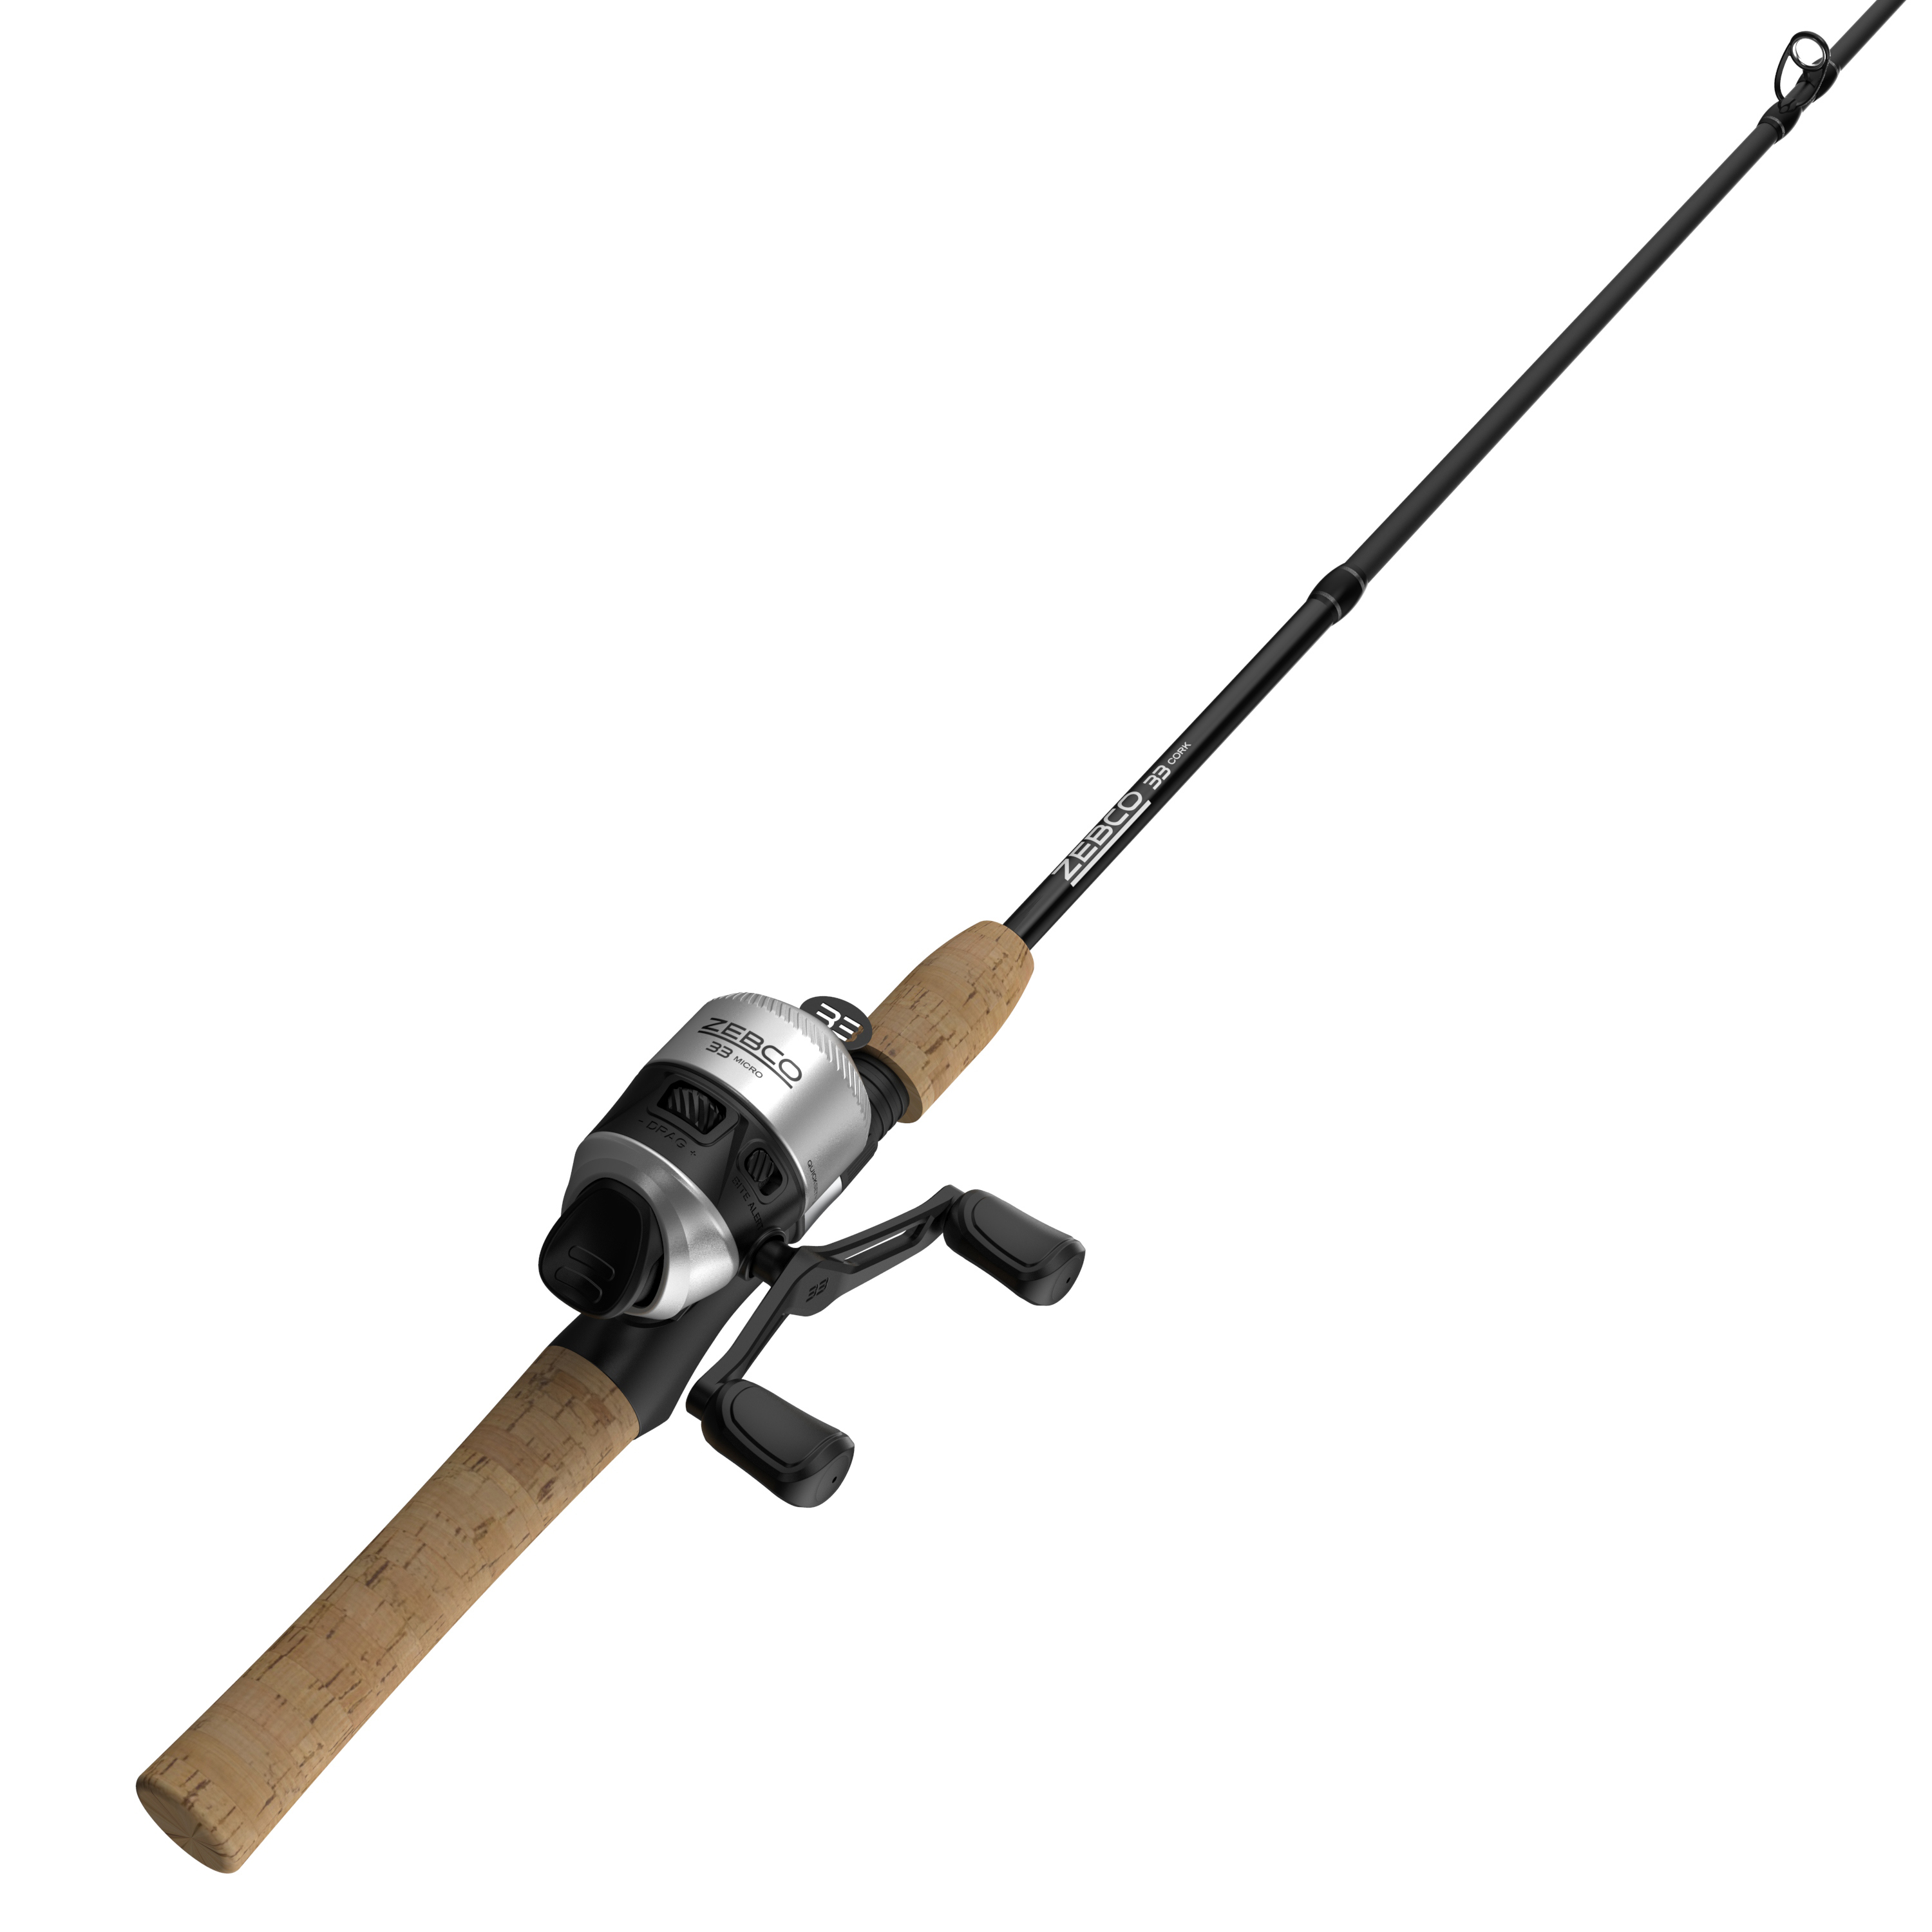 Zebco Fin Commander Spincast Reel and Fishing Rod Combo, 5-Foot 2-Piece  Fishing Pole, Size 10 Reel, Changeable Right- or Left-Hand Retrieve